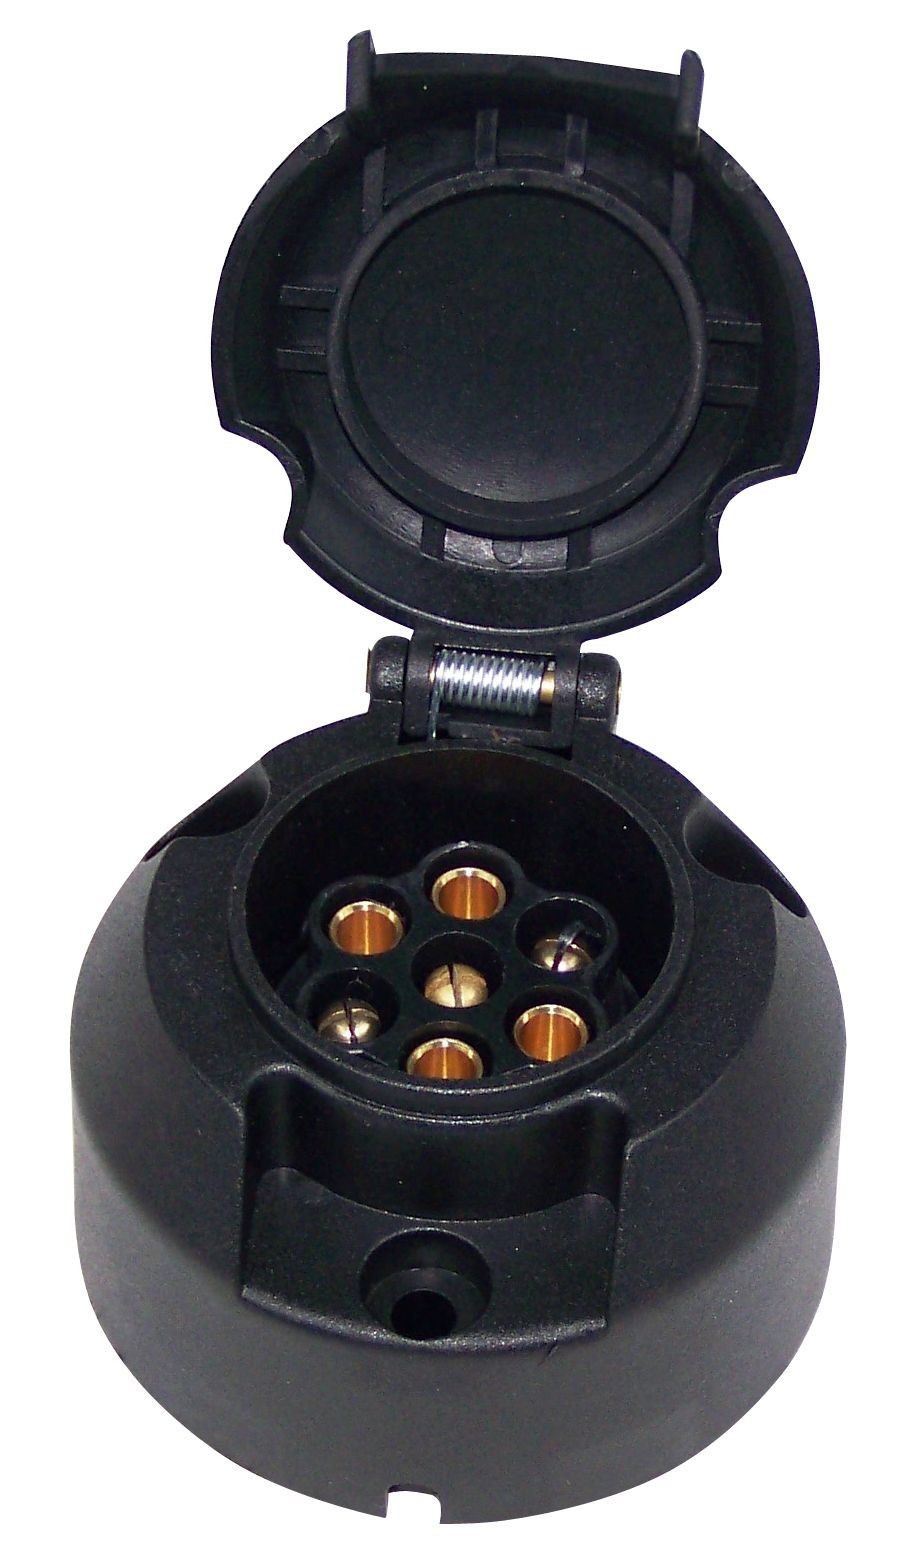 7-pin car socket with plastic housing